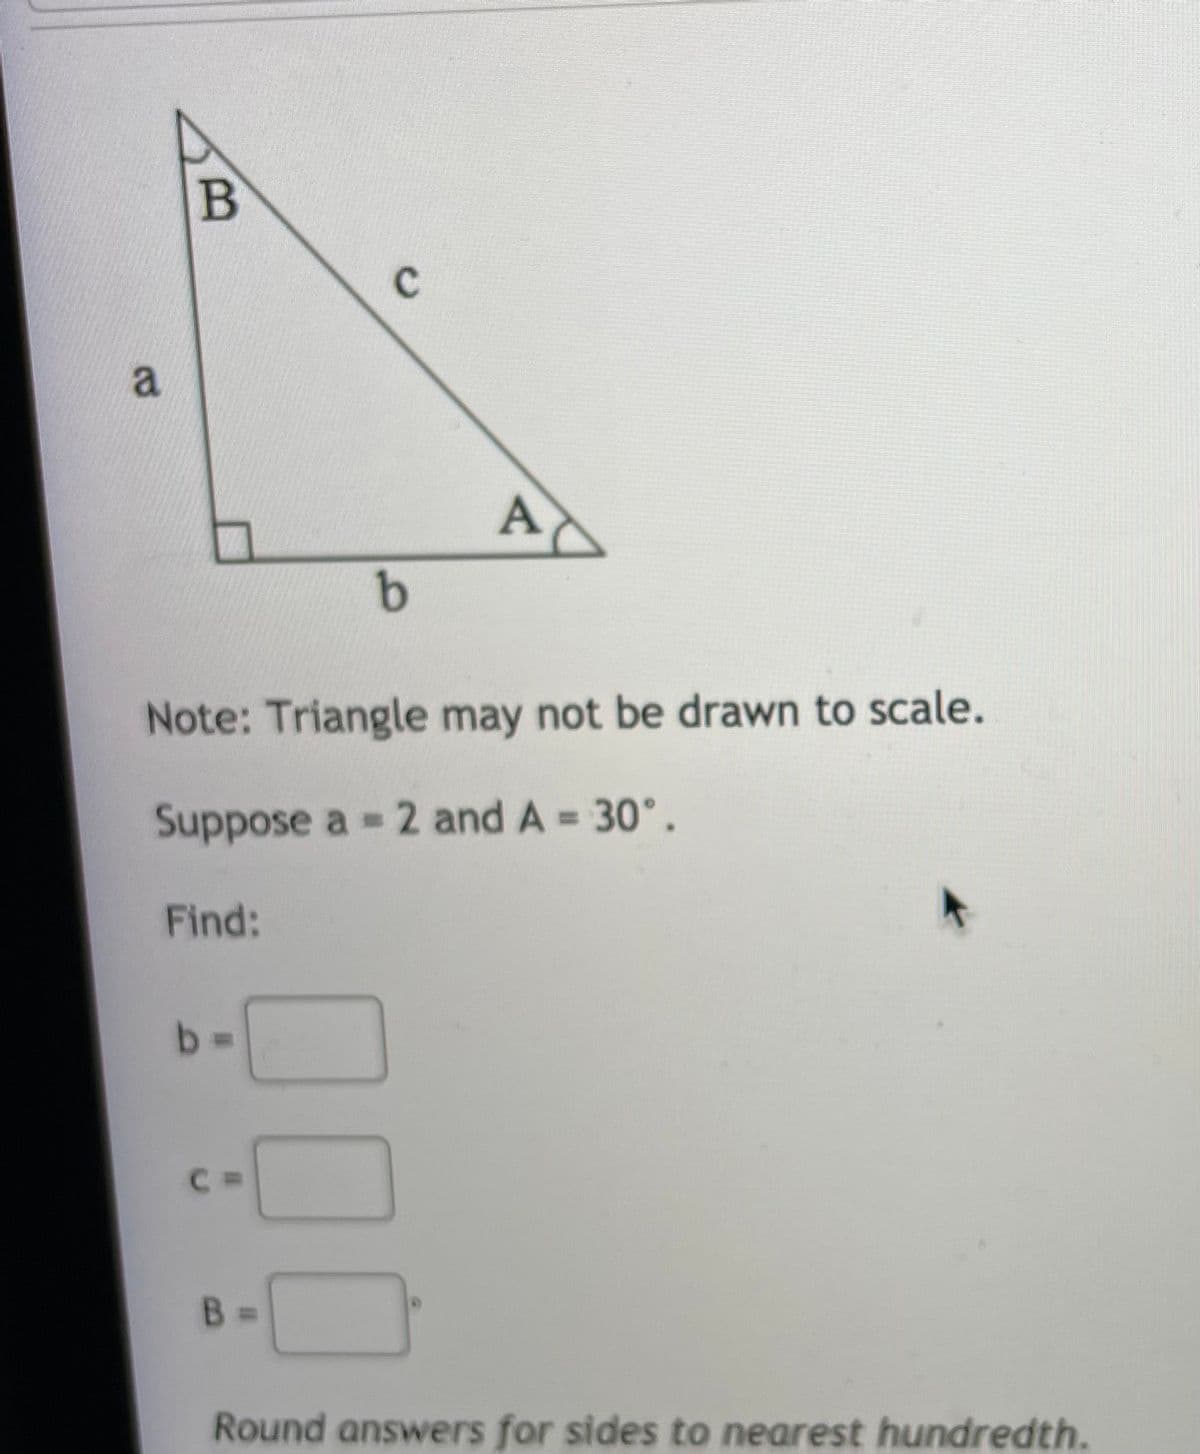 a
A
Note: Triangle may not be drawn to scale.
Suppose a 2 and A = 30°.
Find:
b%3D
B.
Round answers for sides to nearest hundredth.
